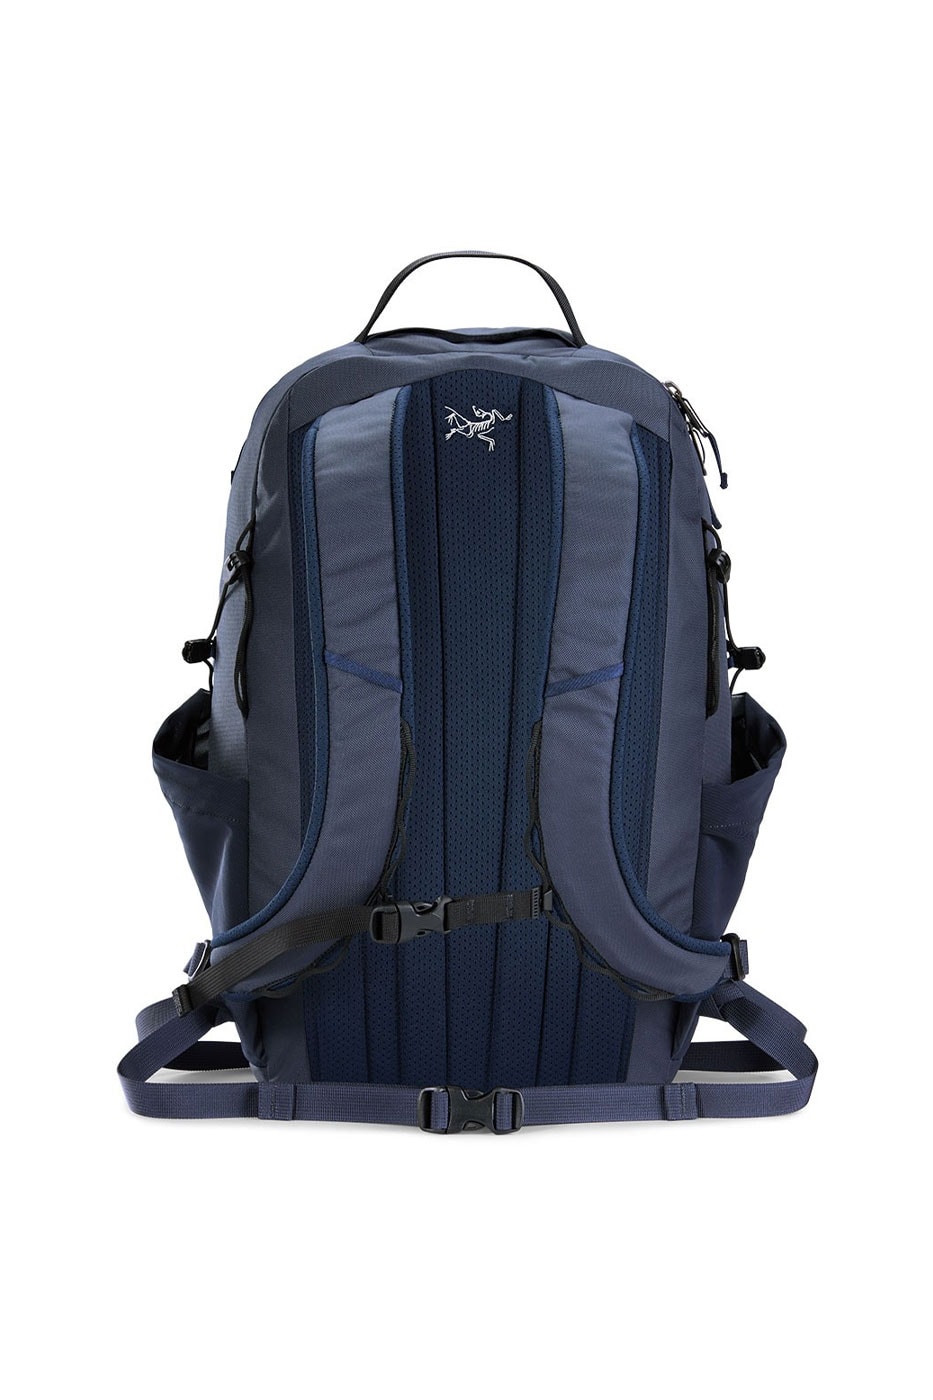 Arc'teryx Releases Its First Updated Version of Its "Mantis" Backpack outdoors accessories 16L capacity travel compact environmental